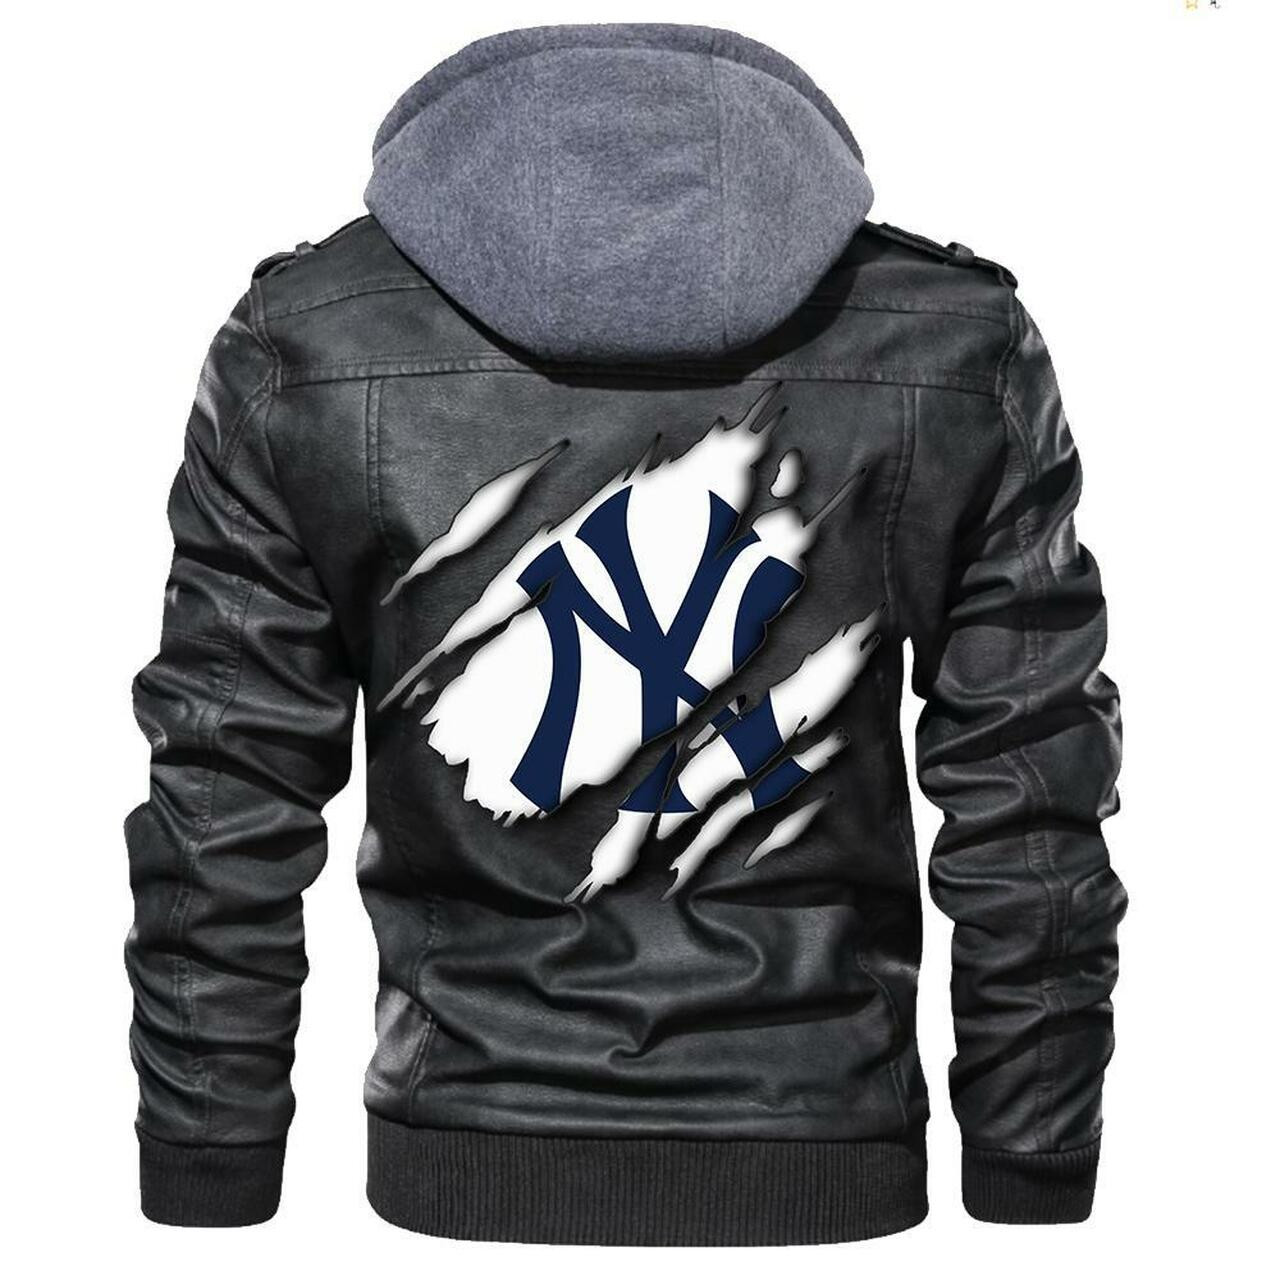 Check out and find the right leather jacket below 381